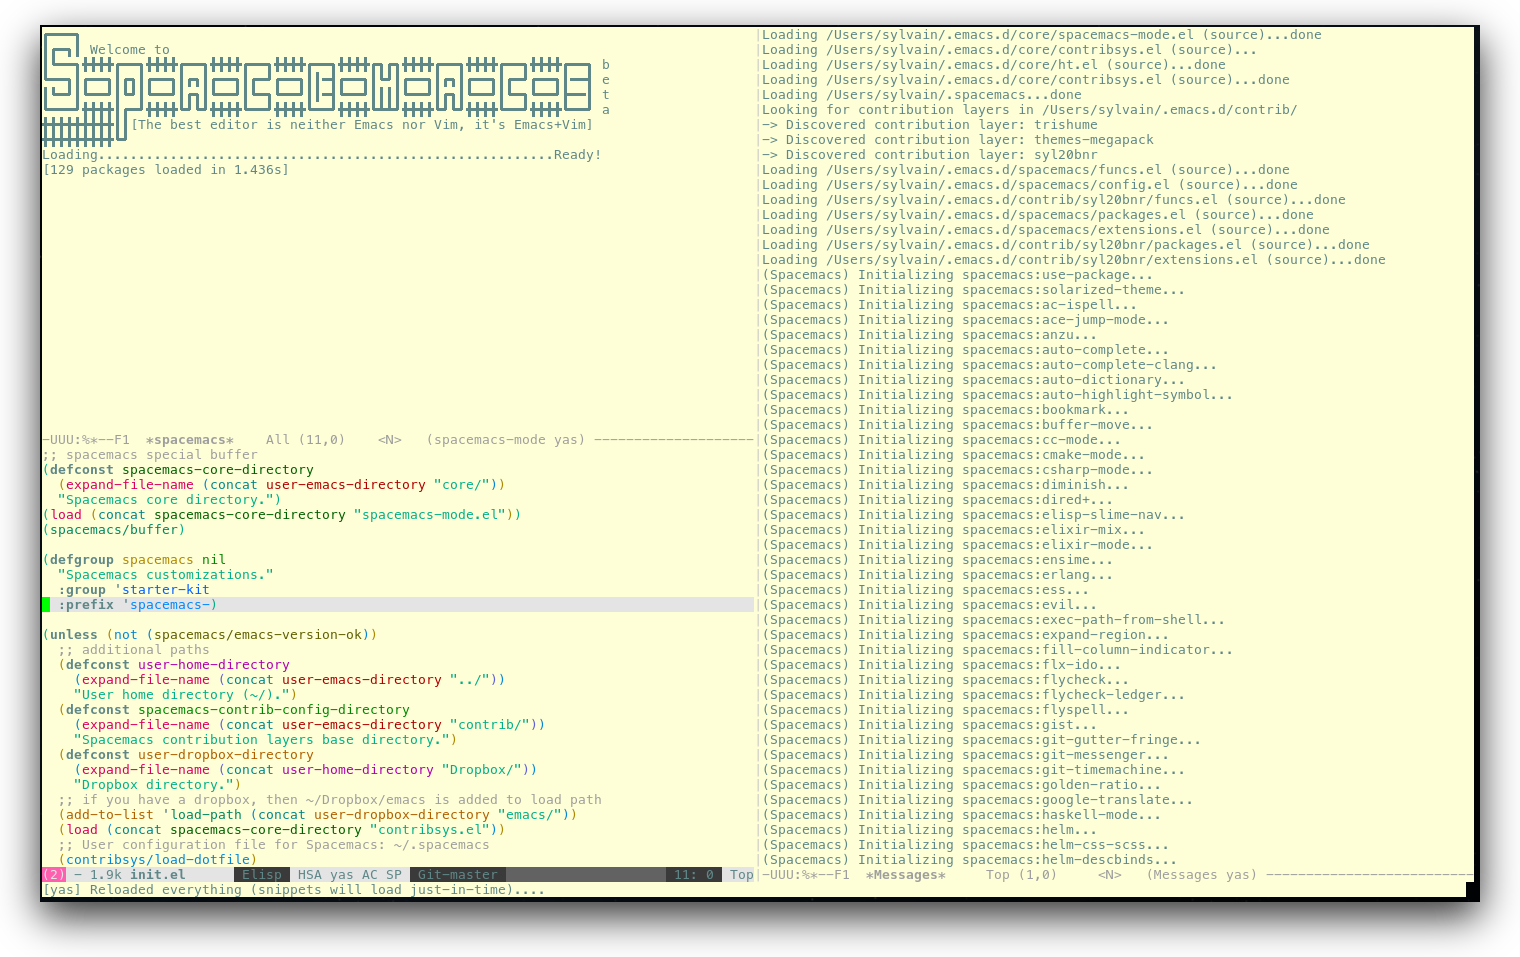 /TakeV/spacemacs/media/commit/9726033515051b4fcba1ca53af4fa4aad8b1a254/doc/img/spacemacs-urxvt.png